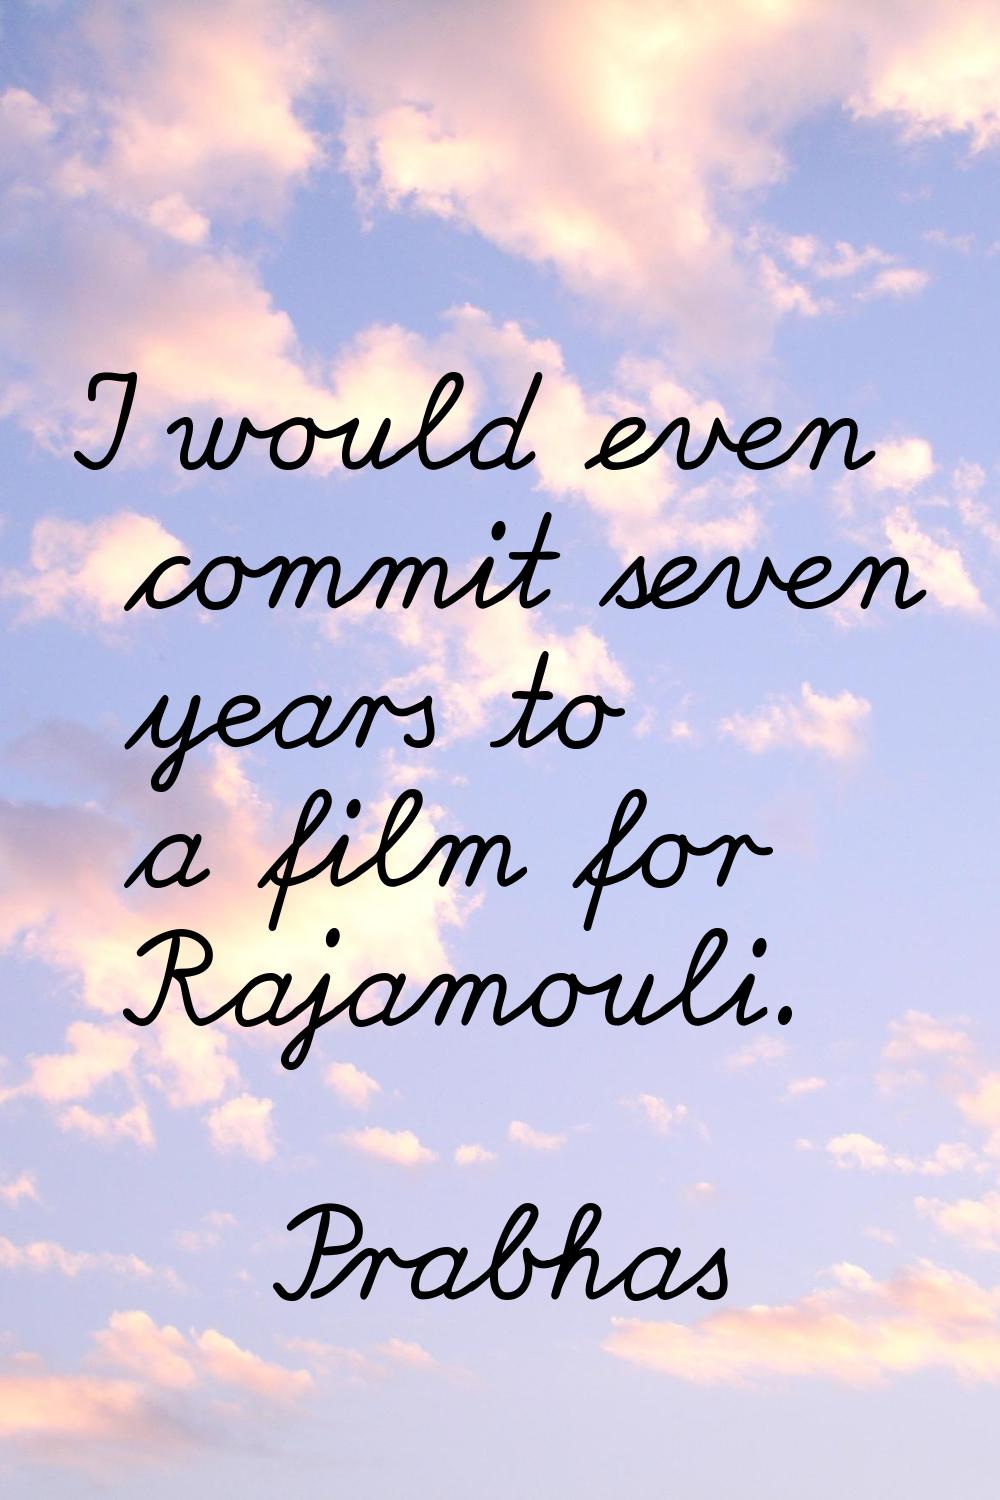 I would even commit seven years to a film for Rajamouli.